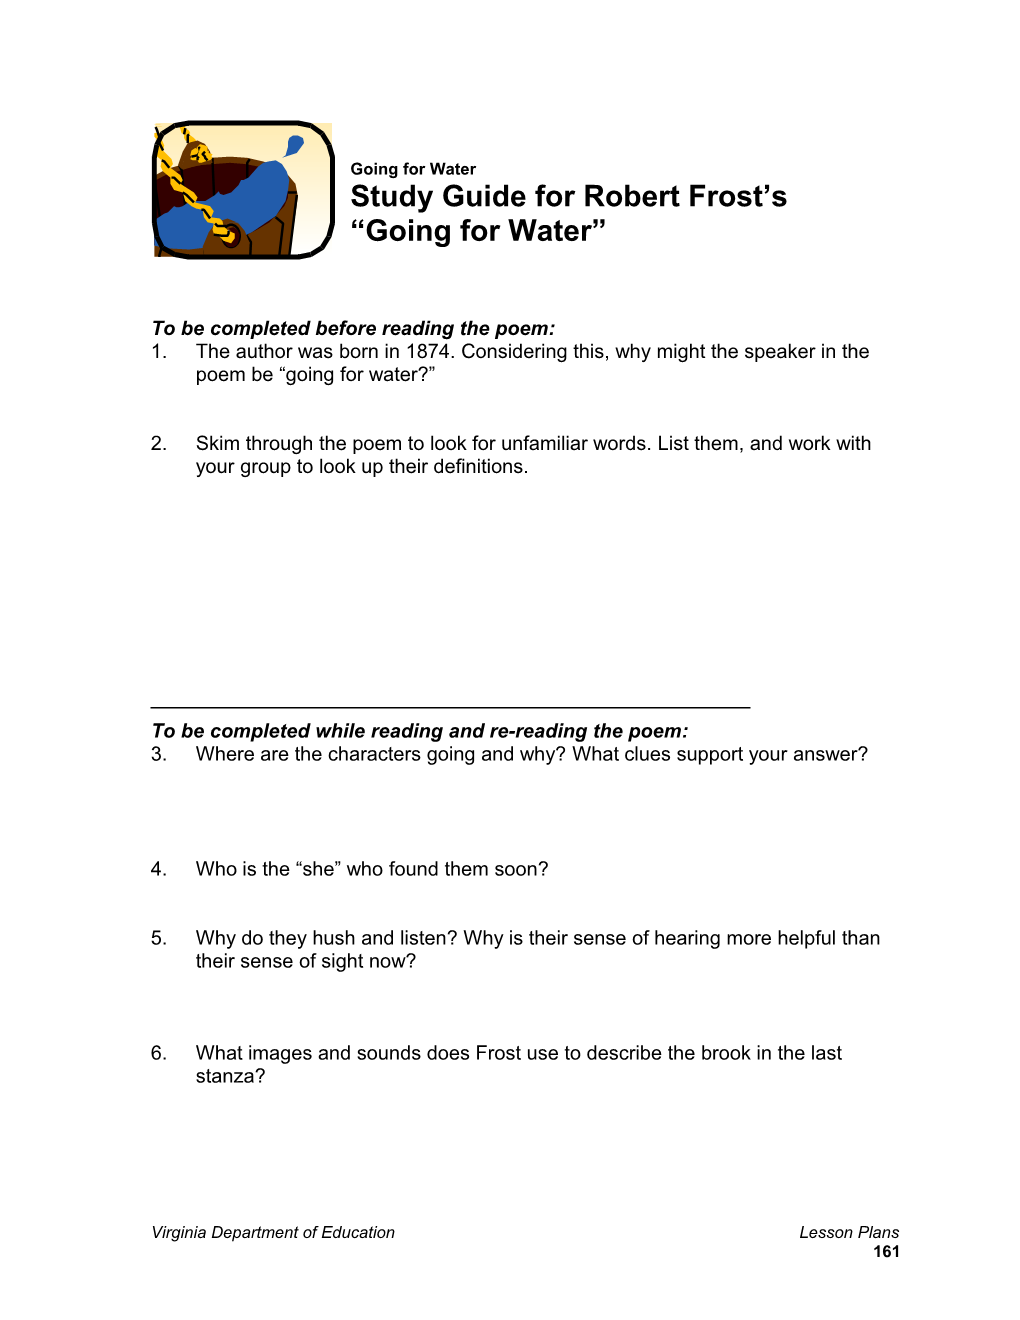 Study Guide for Robert Frost's Going for Water